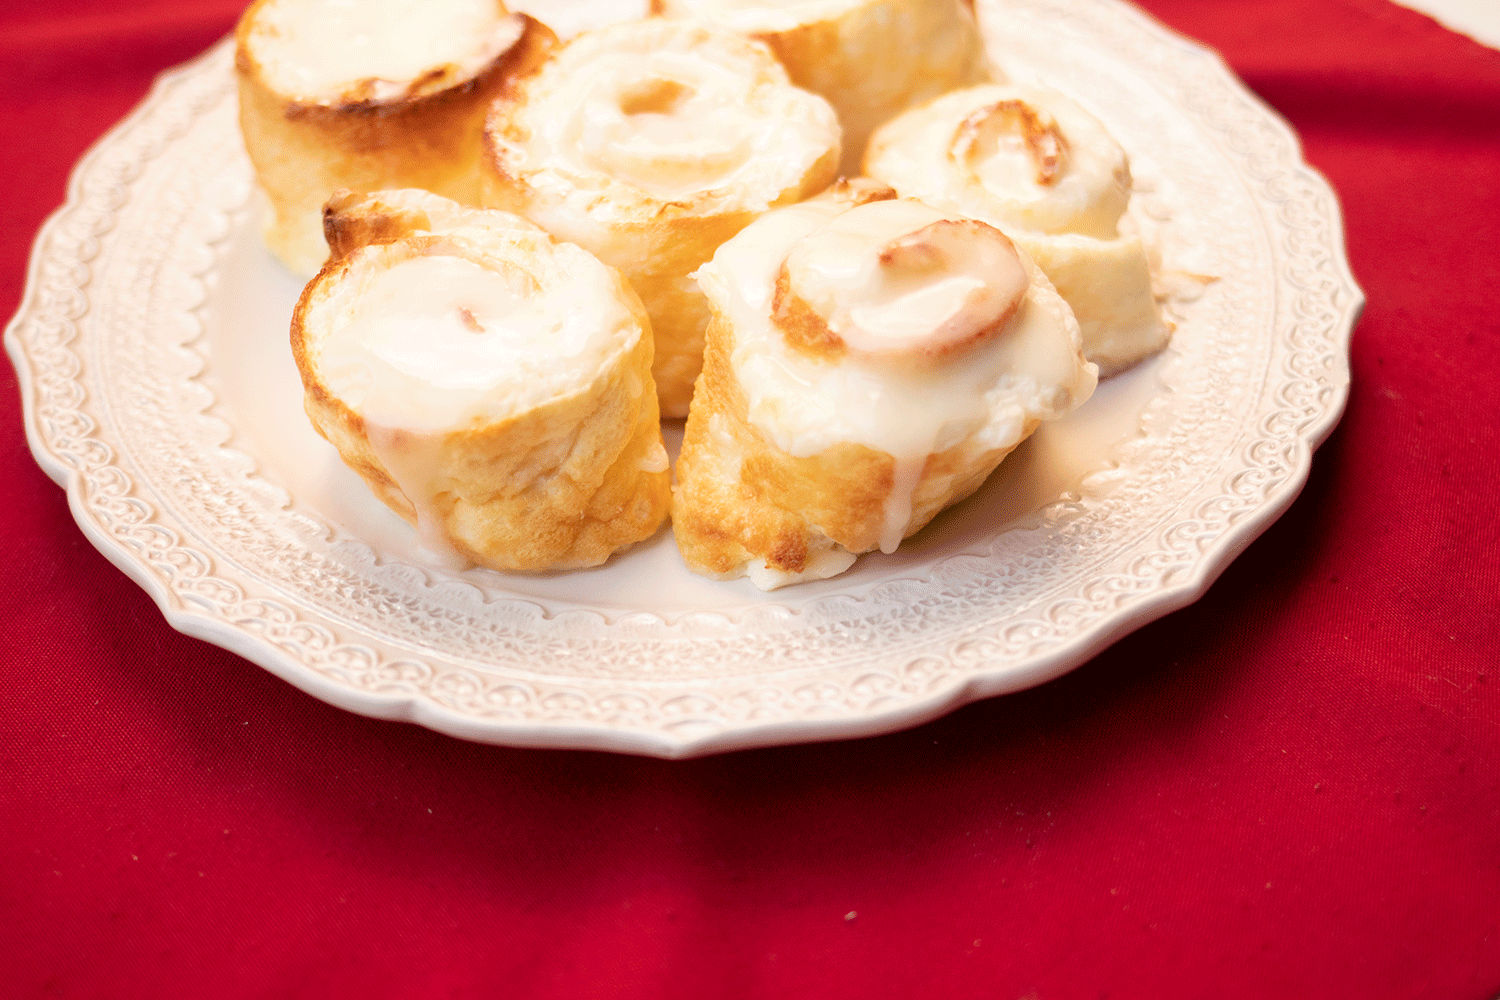 CHERRY CREAM CHEESE ROLLS WITH PROTEIN SPARING BREAD